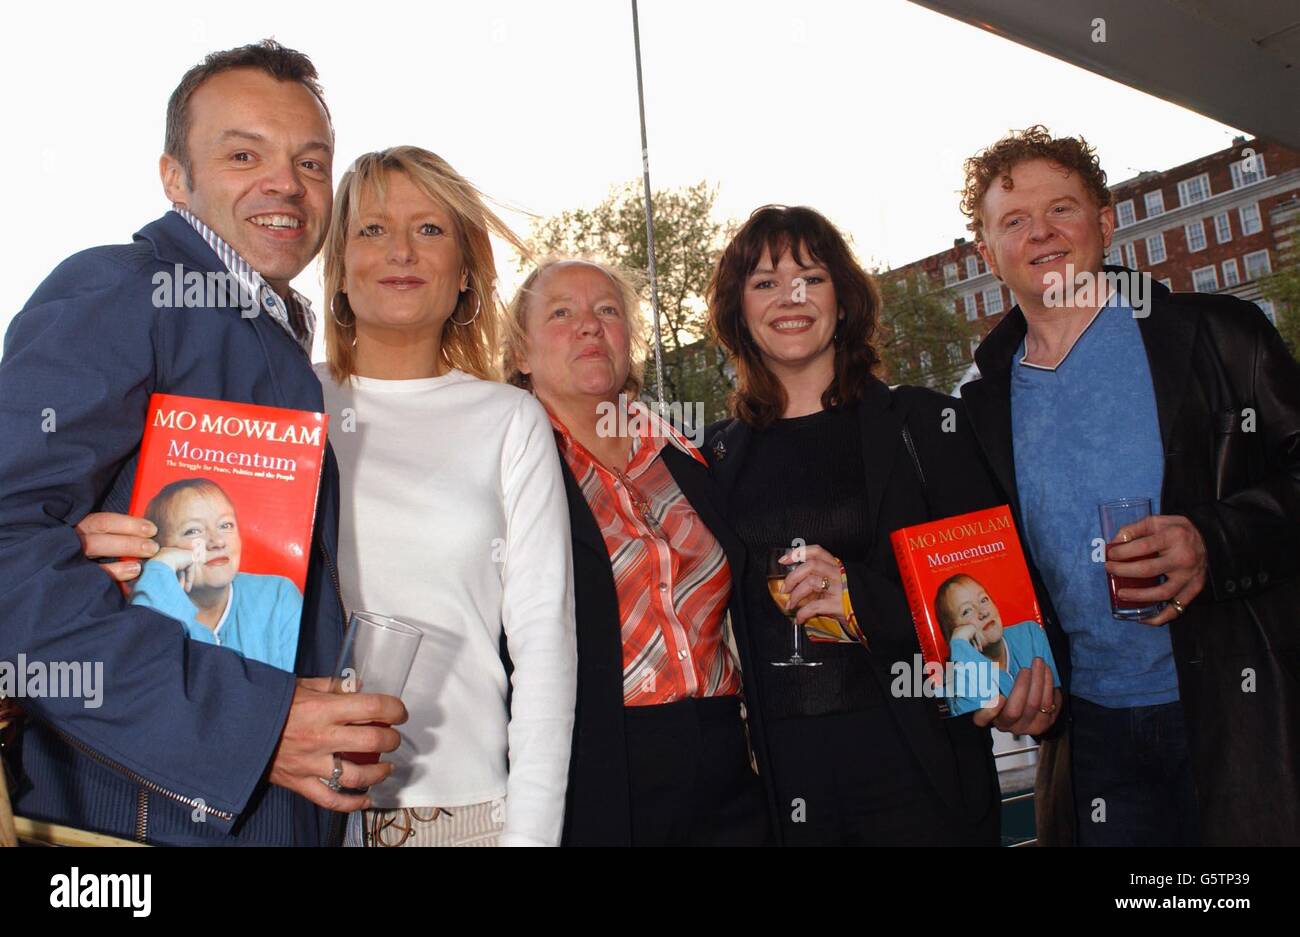 Former Labour MP and Cabinet Minister, Dr Mo Mowlam (centre) with (L-R) Graham Norton, Gaby Roslin, Josie Lawrence and Mick Hucknall during the launch party of Mo Mowlam's autobiography Momentum: The Struggle For Peace, Politics and the People. * at Westminster Boating Base in London. Stock Photo